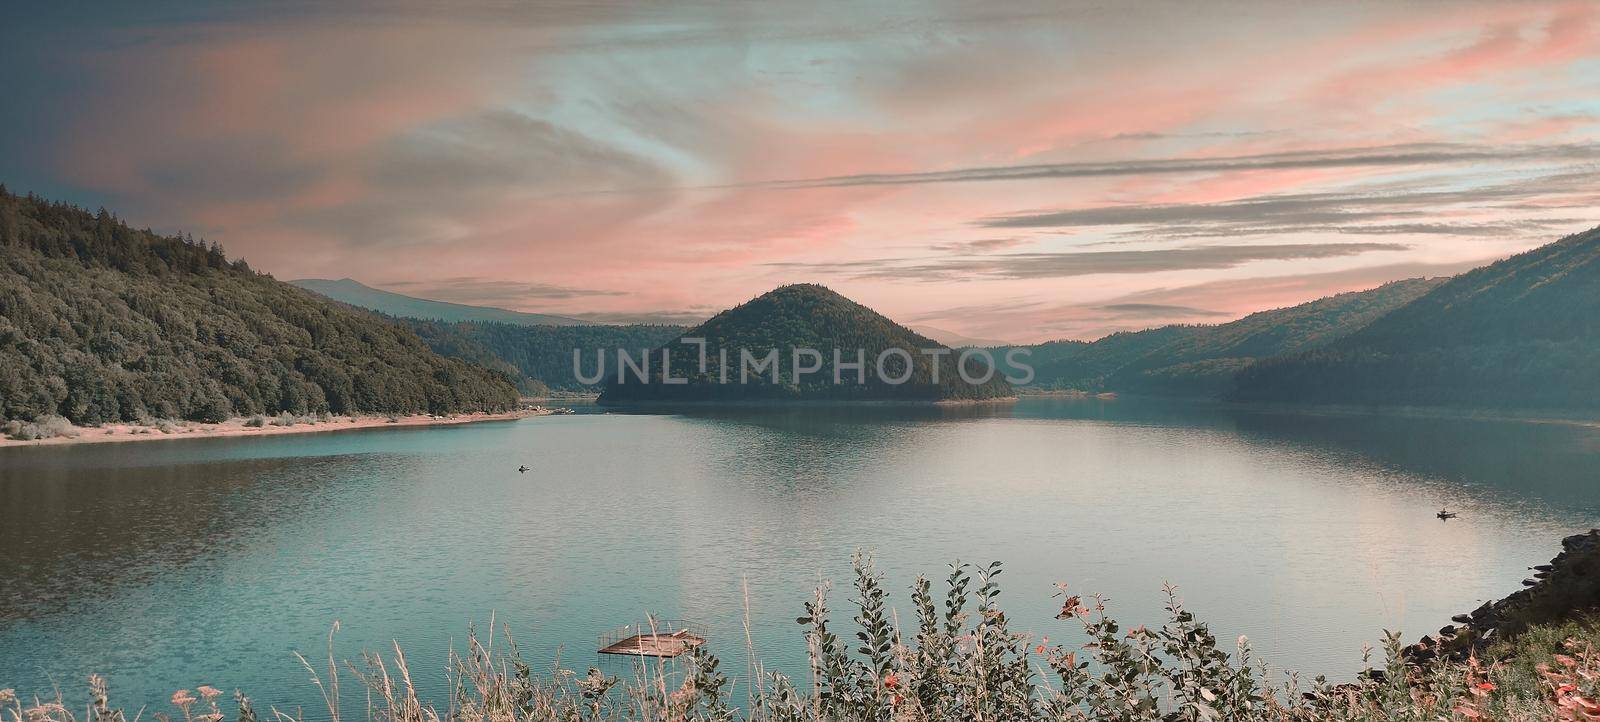 Beautifull valley with view to hill and lake, sunset light by banate